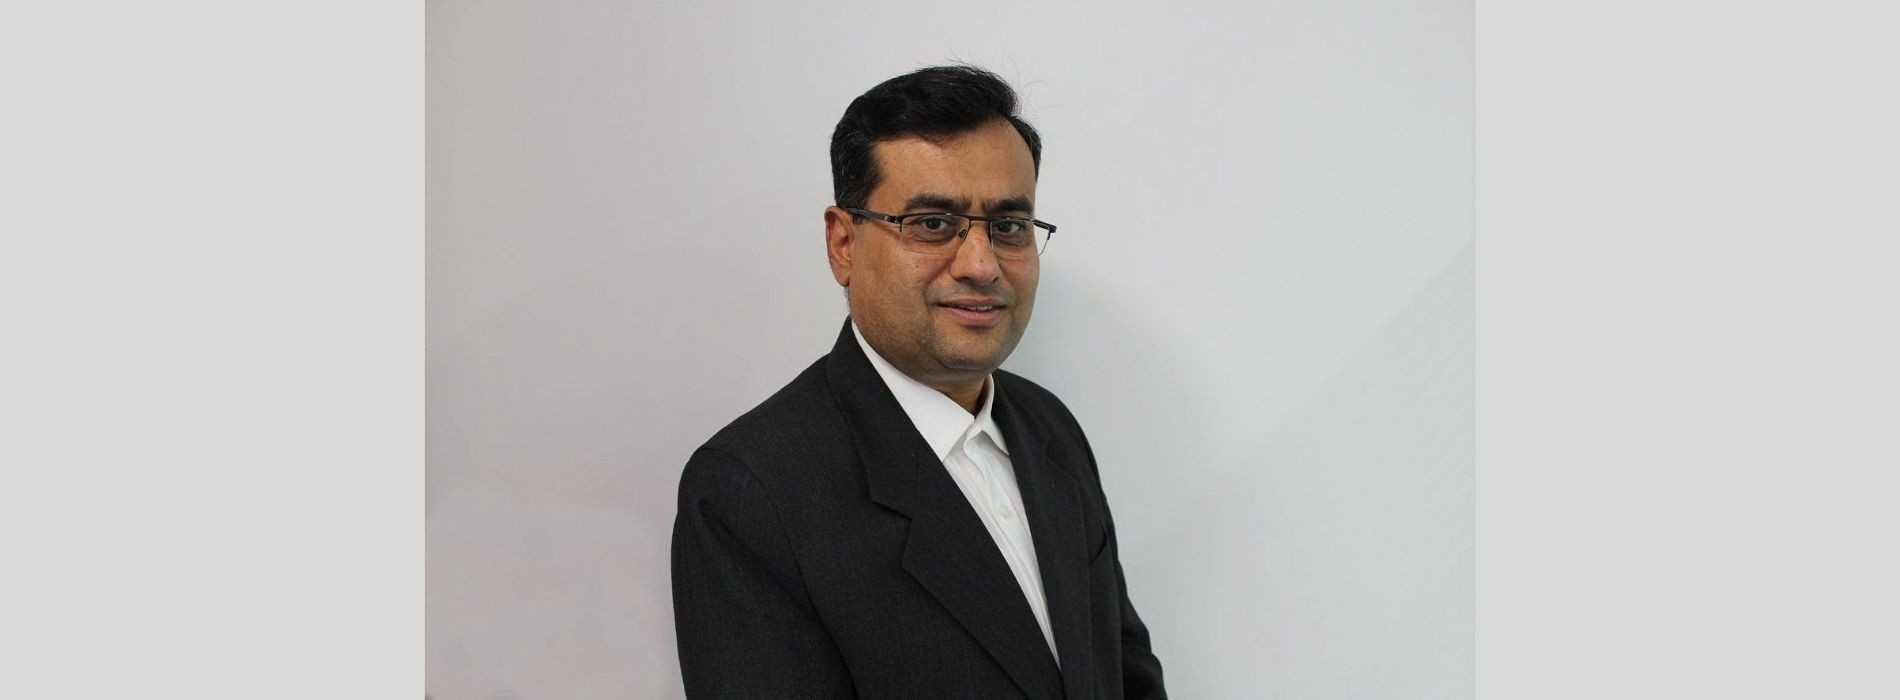 Imagining Indian Tourism’s recovery with InterGlobe Technology Quotient’s: Sandeep Dwivedi